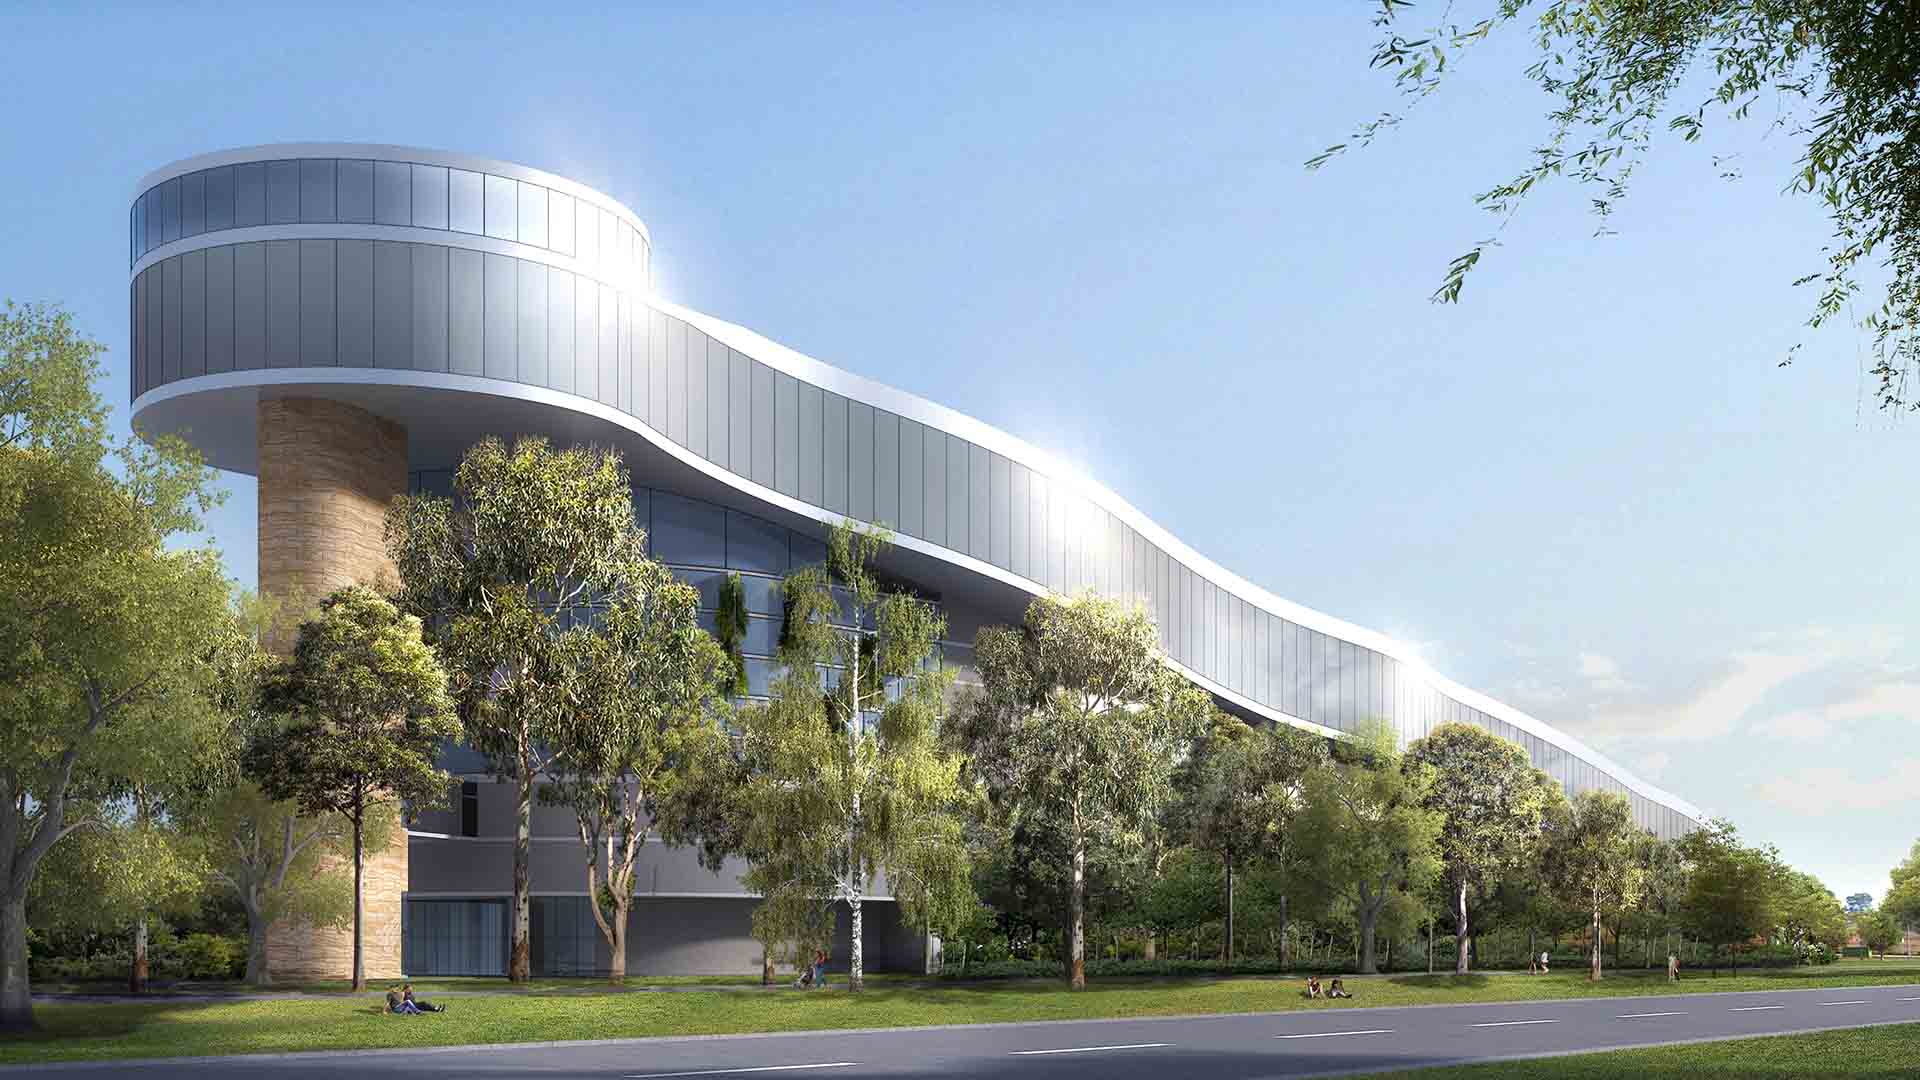 Western Sydney's $300-Million Indoor Snow Resort Is One Step Closer to Becoming a Reality